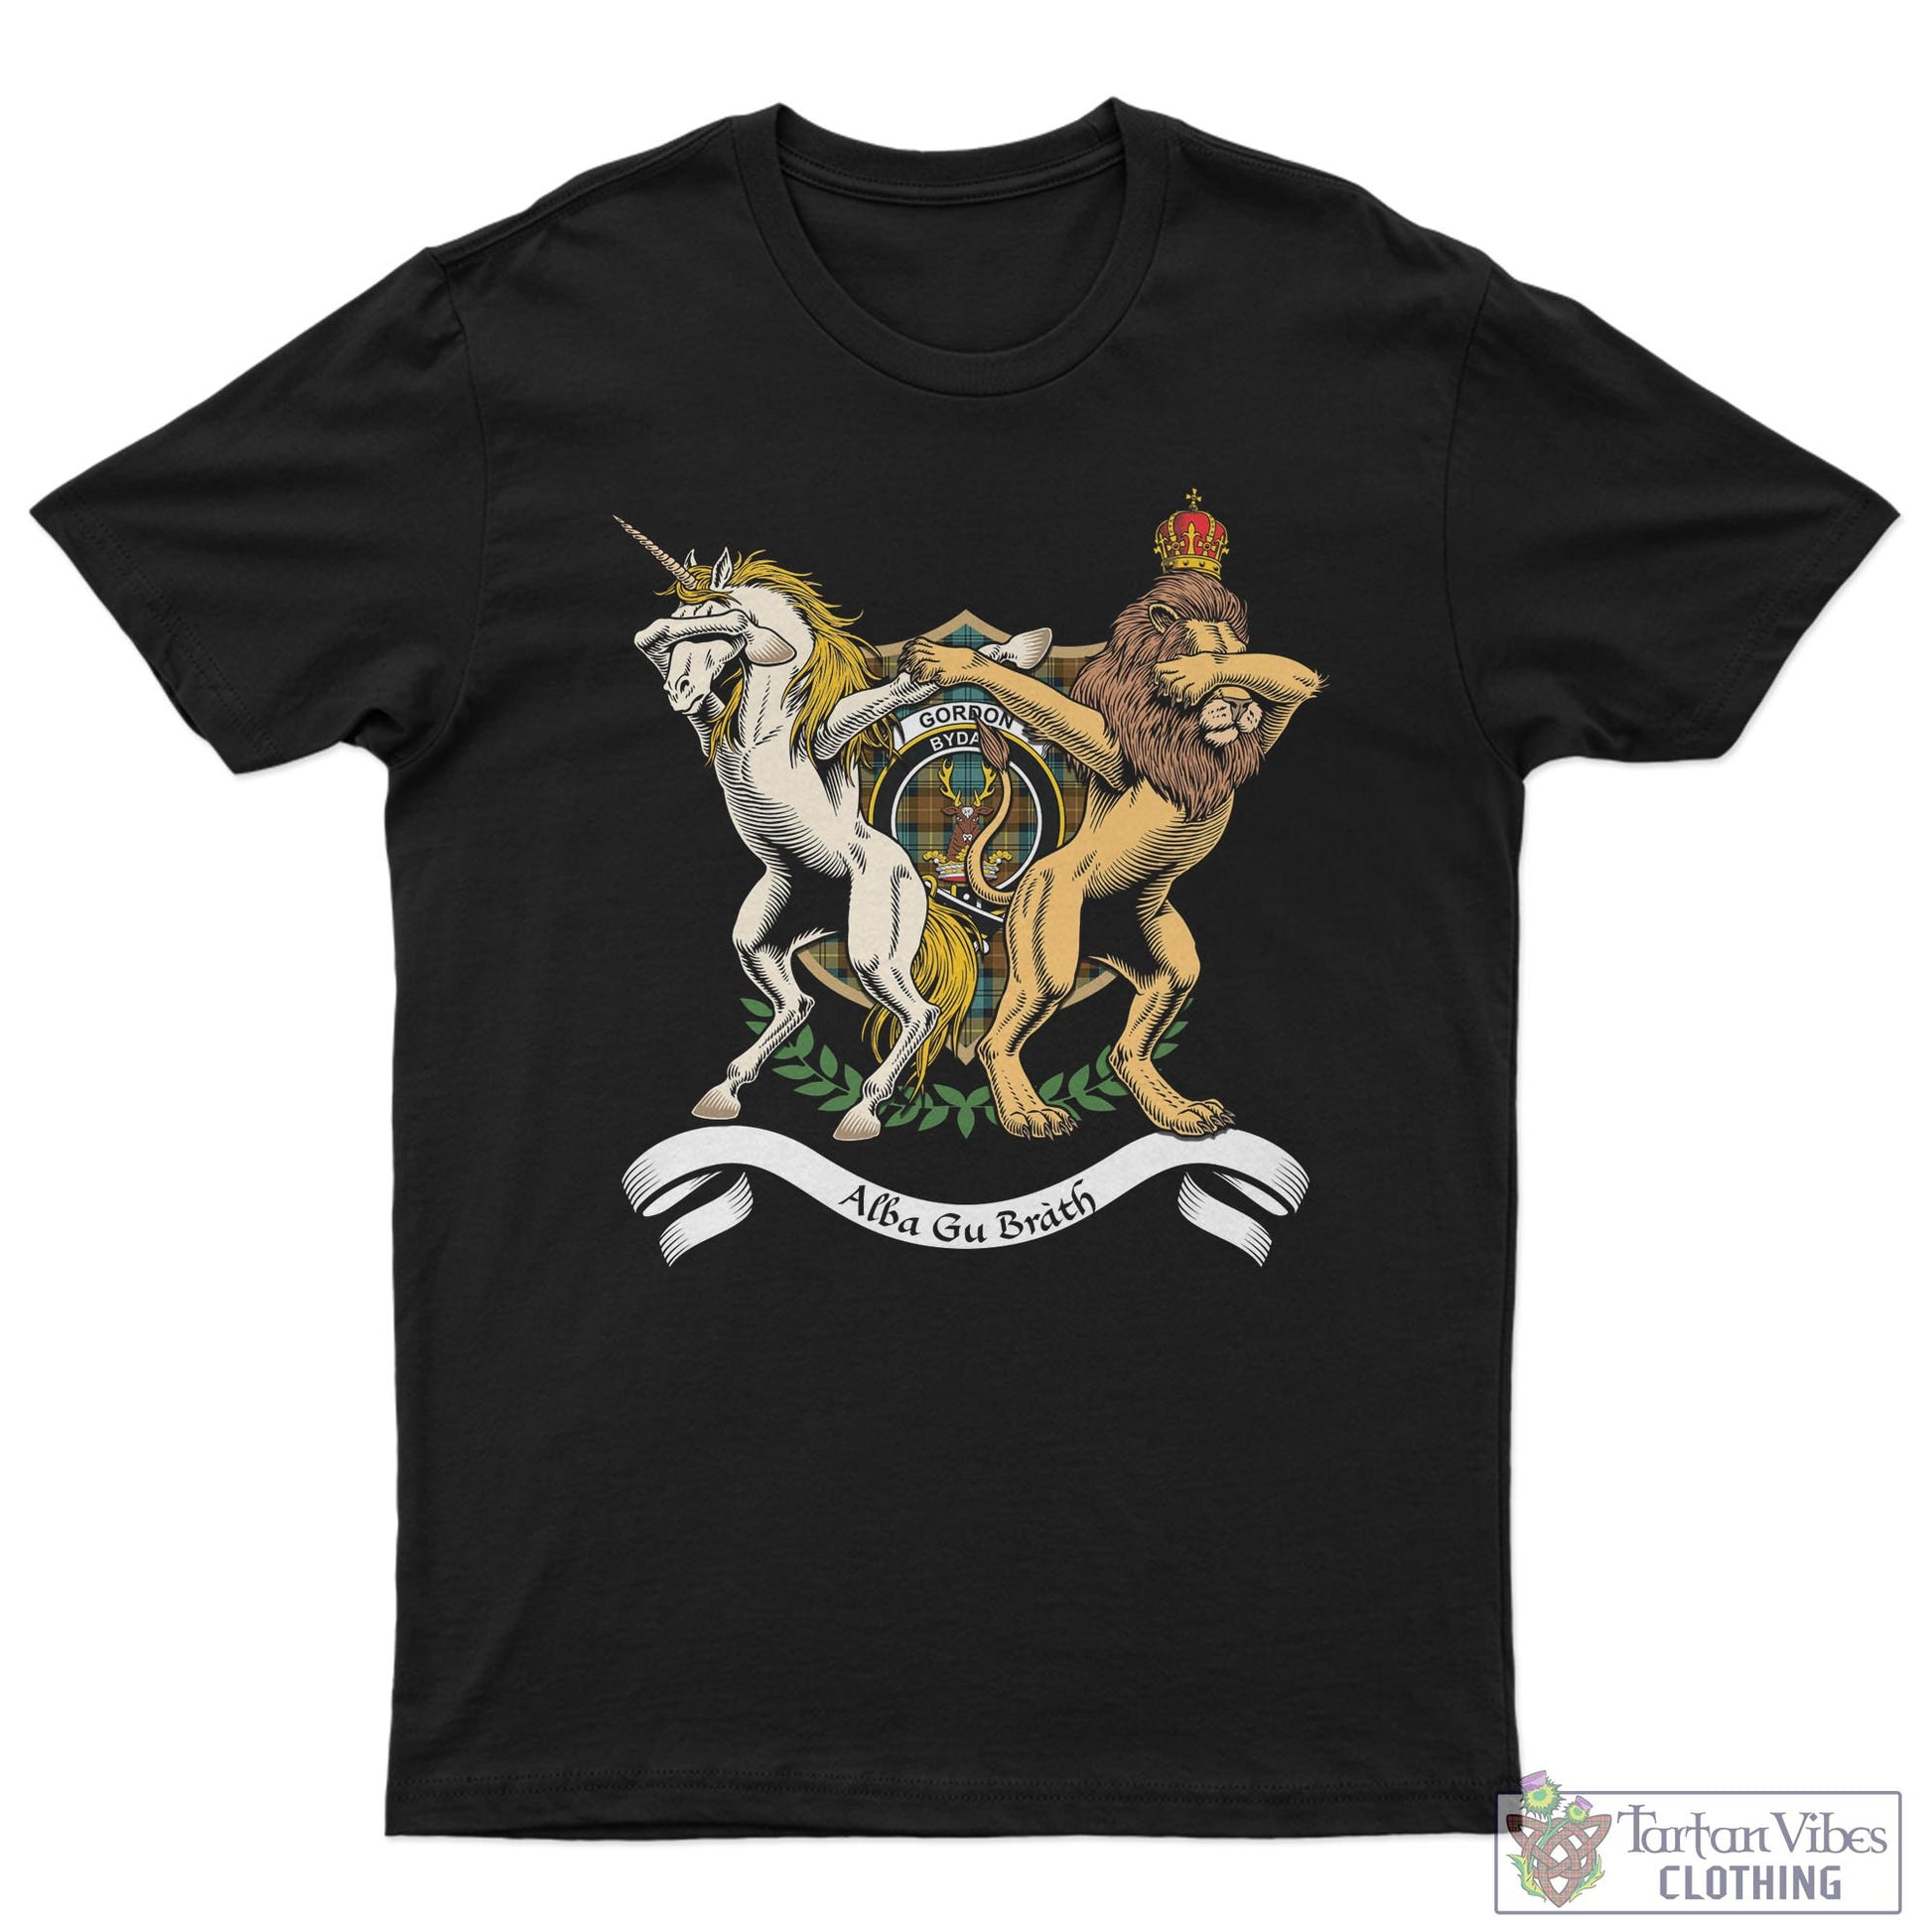 Tartan Vibes Clothing Gordon Weathered Family Crest Cotton Men's T-Shirt with Scotland Royal Coat Of Arm Funny Style